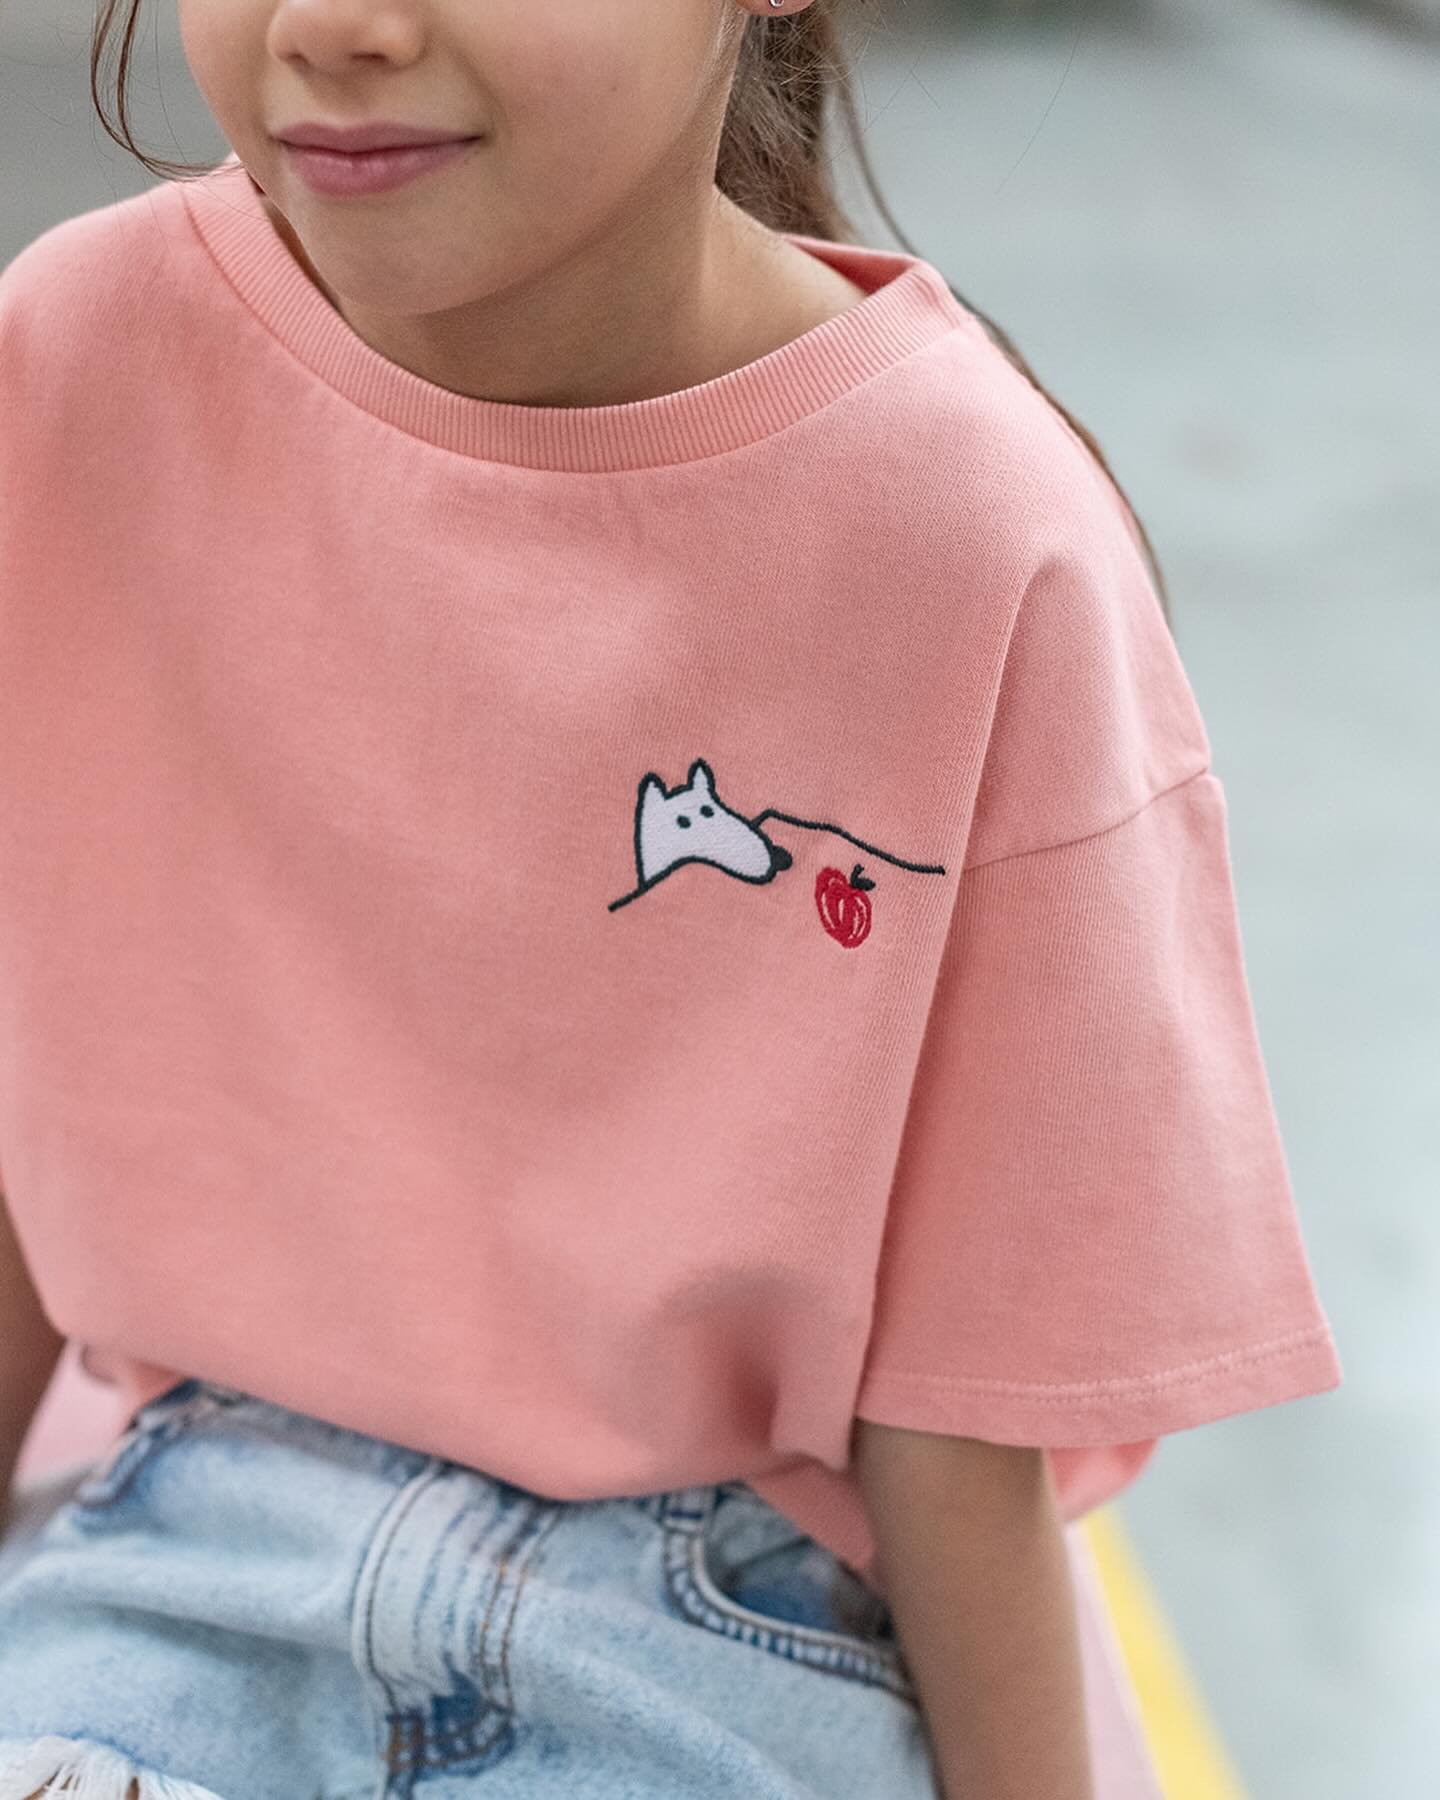 My heart melts for cute prints &amp; breezy fabrics 🌴💞 sniff sniff pink t-shirt by @weekendhouse_kids x printed palmtree shirt by @_playup_ 

#ottotiptotto #ottoilbassottostore #weekendhousekids #playup #kidsfashion #kidsstore #ss24 #lievegem